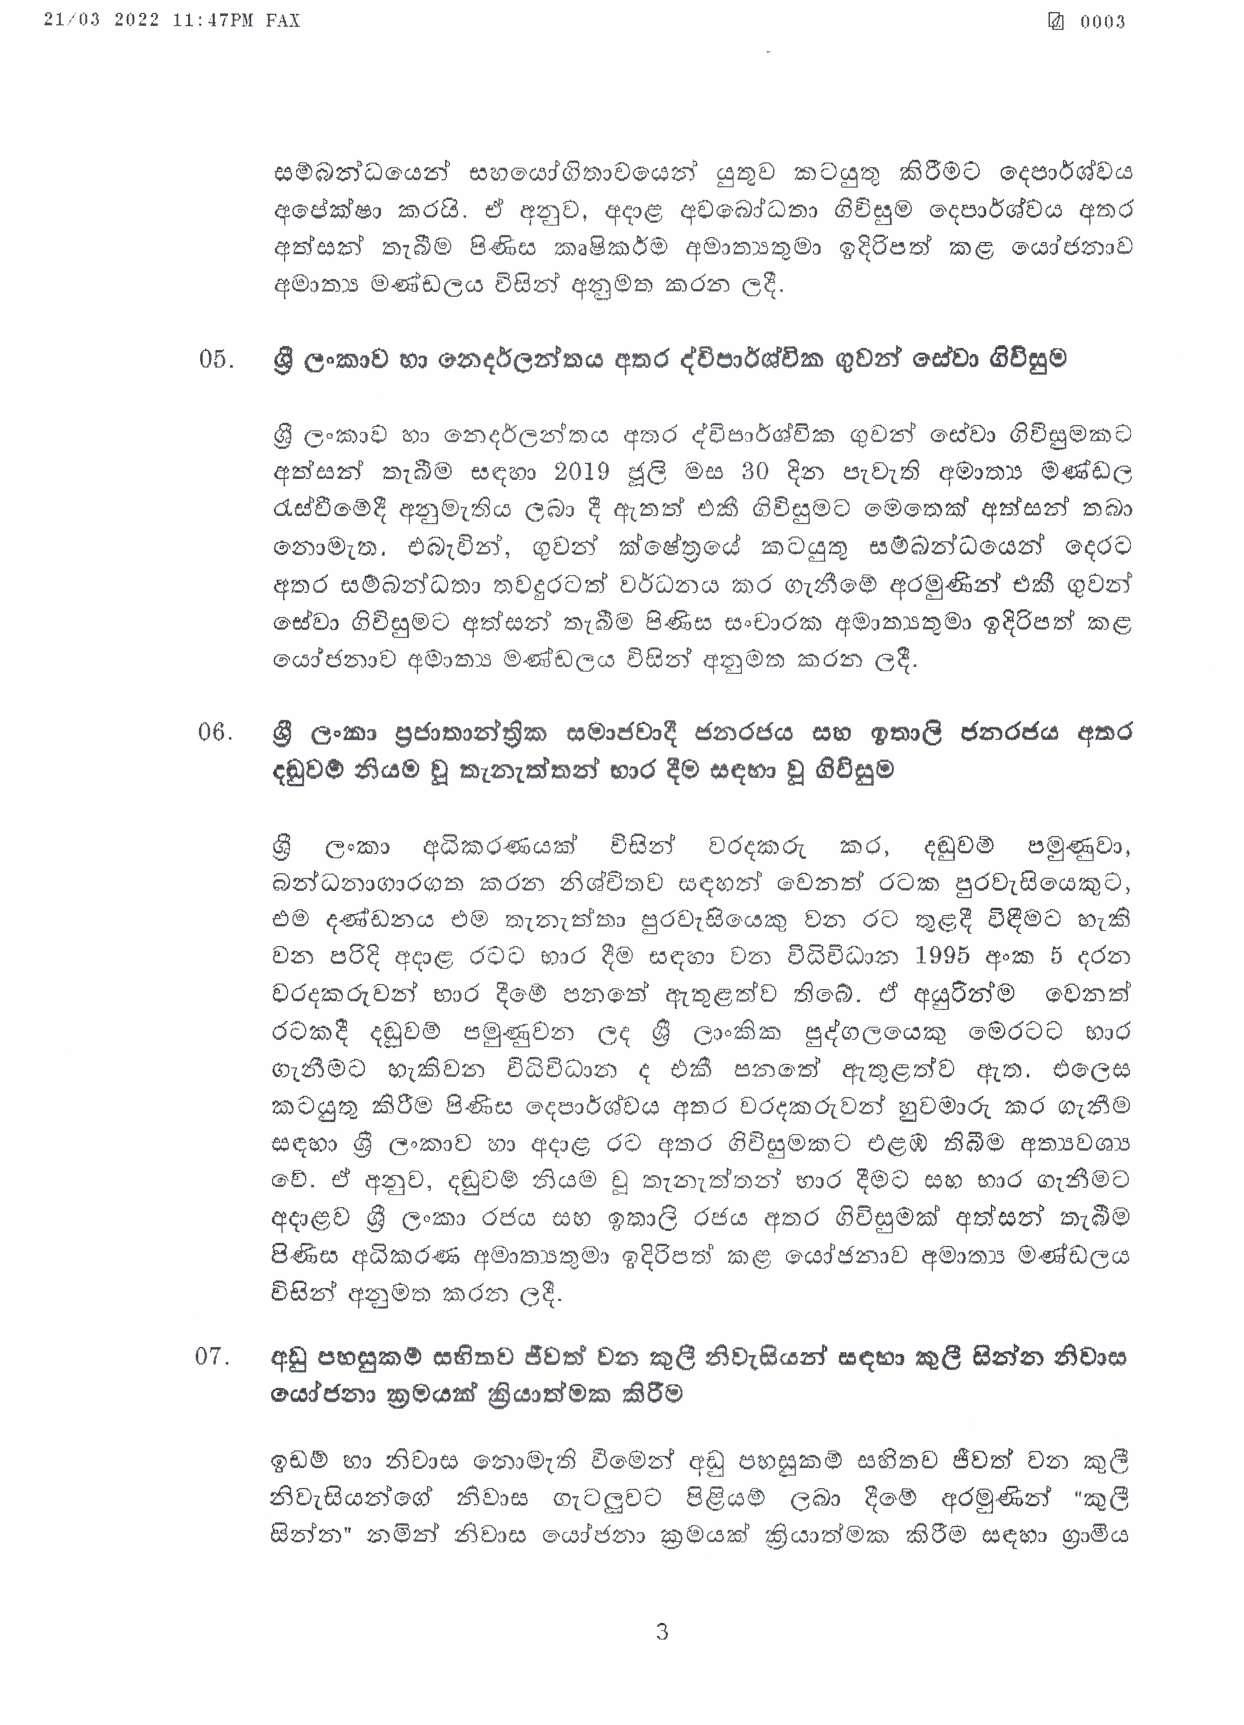 Cabinet Decisions on 21.03.2022 page 003